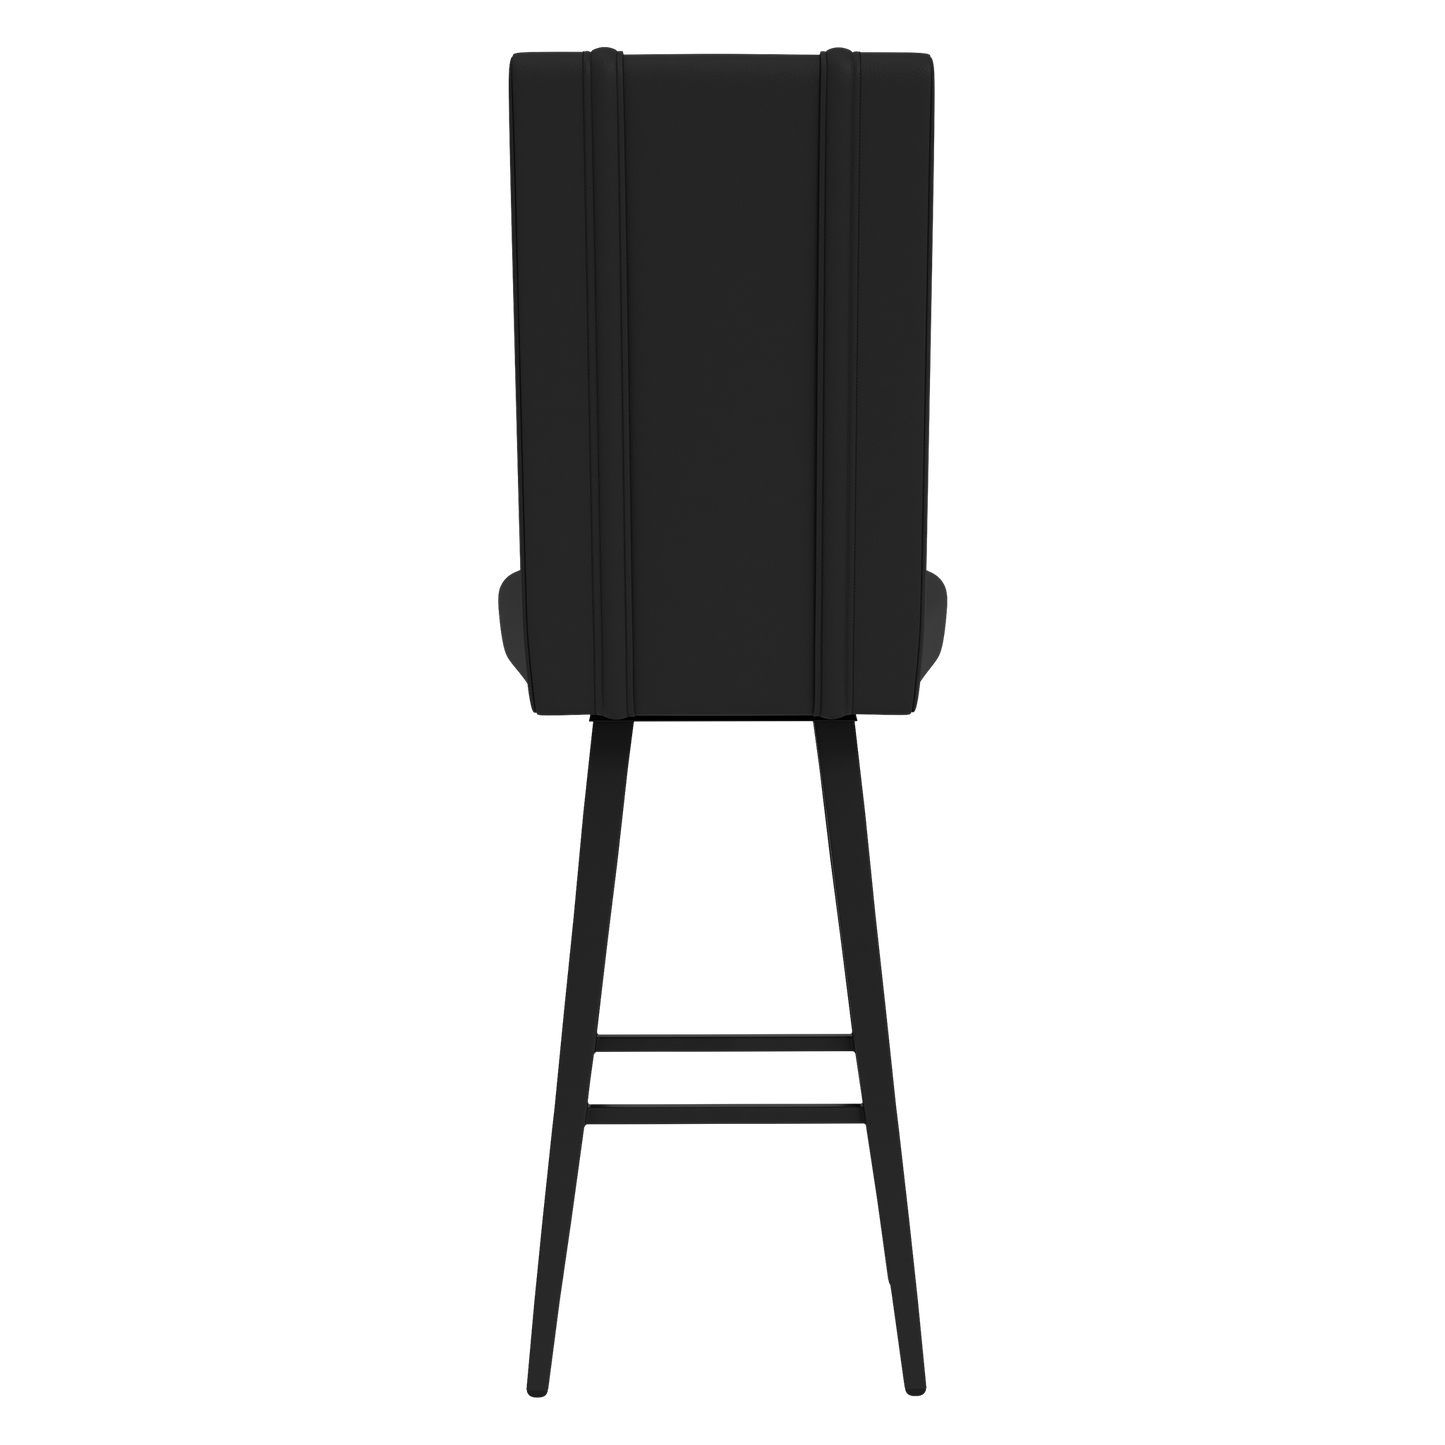 Swivel Bar Stool 2000 with Golden State Warriors 7X Champions Logo